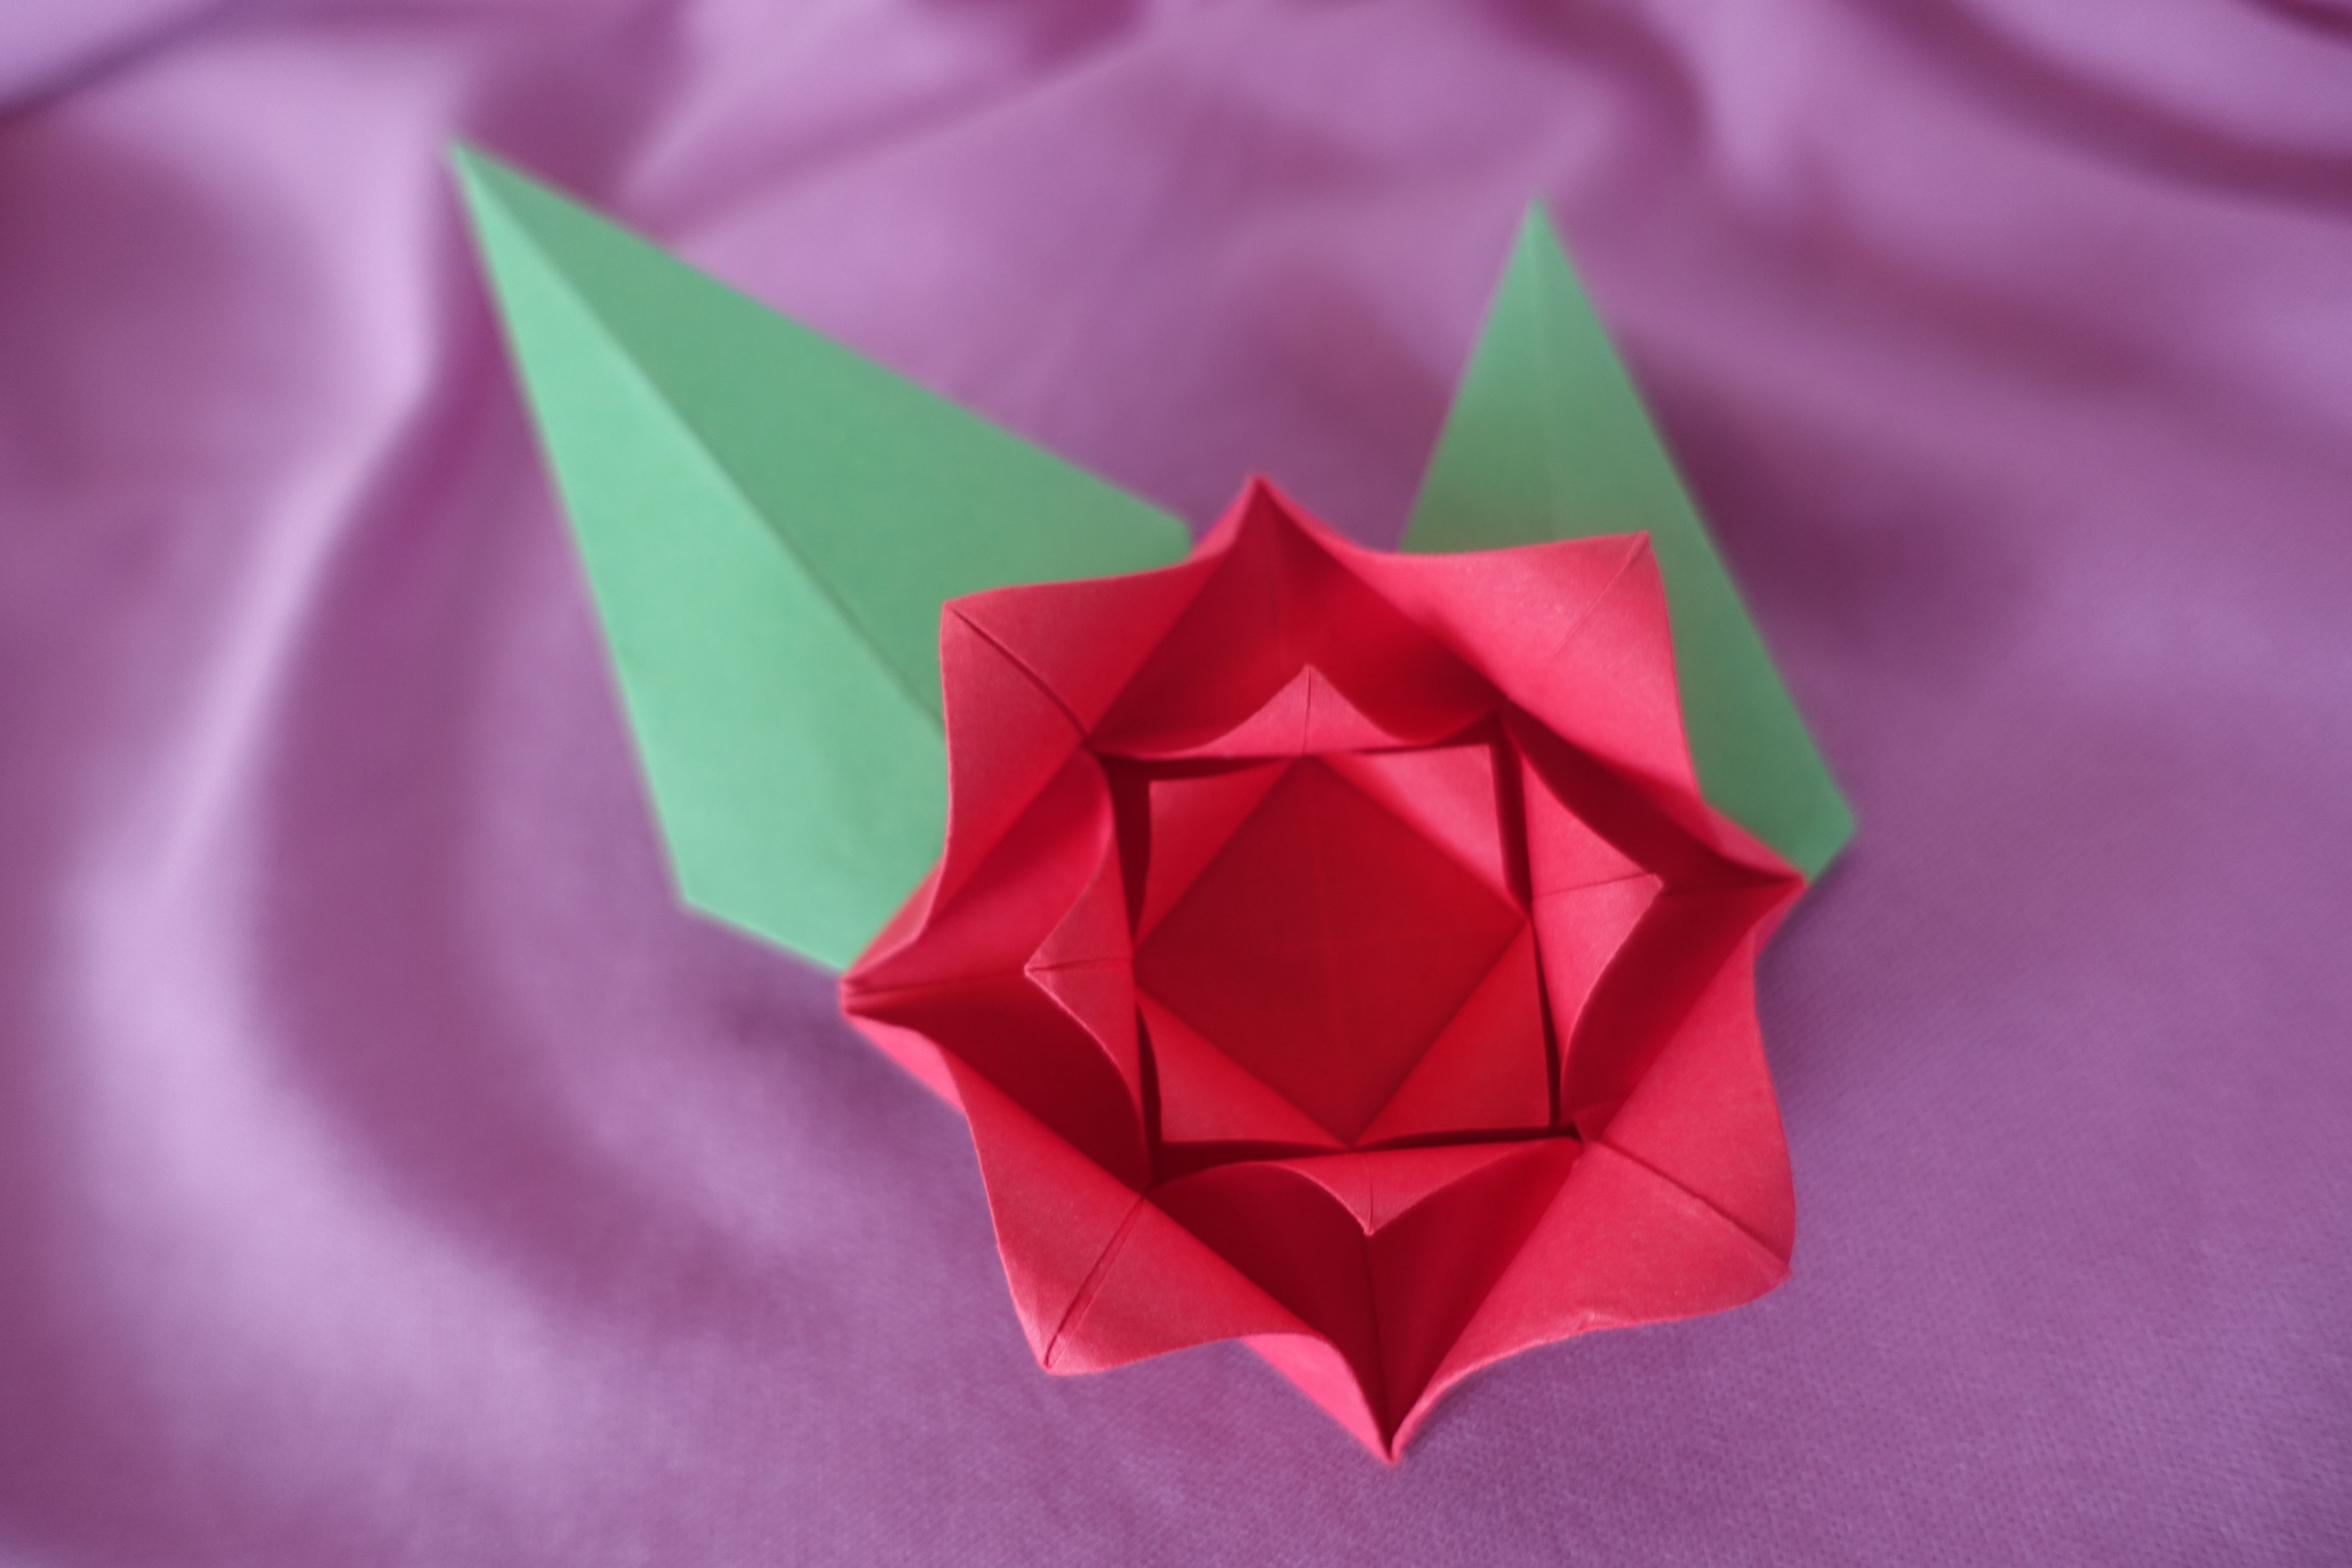 How To Make A Flower Origami Easy Make An Easy Origami Rose